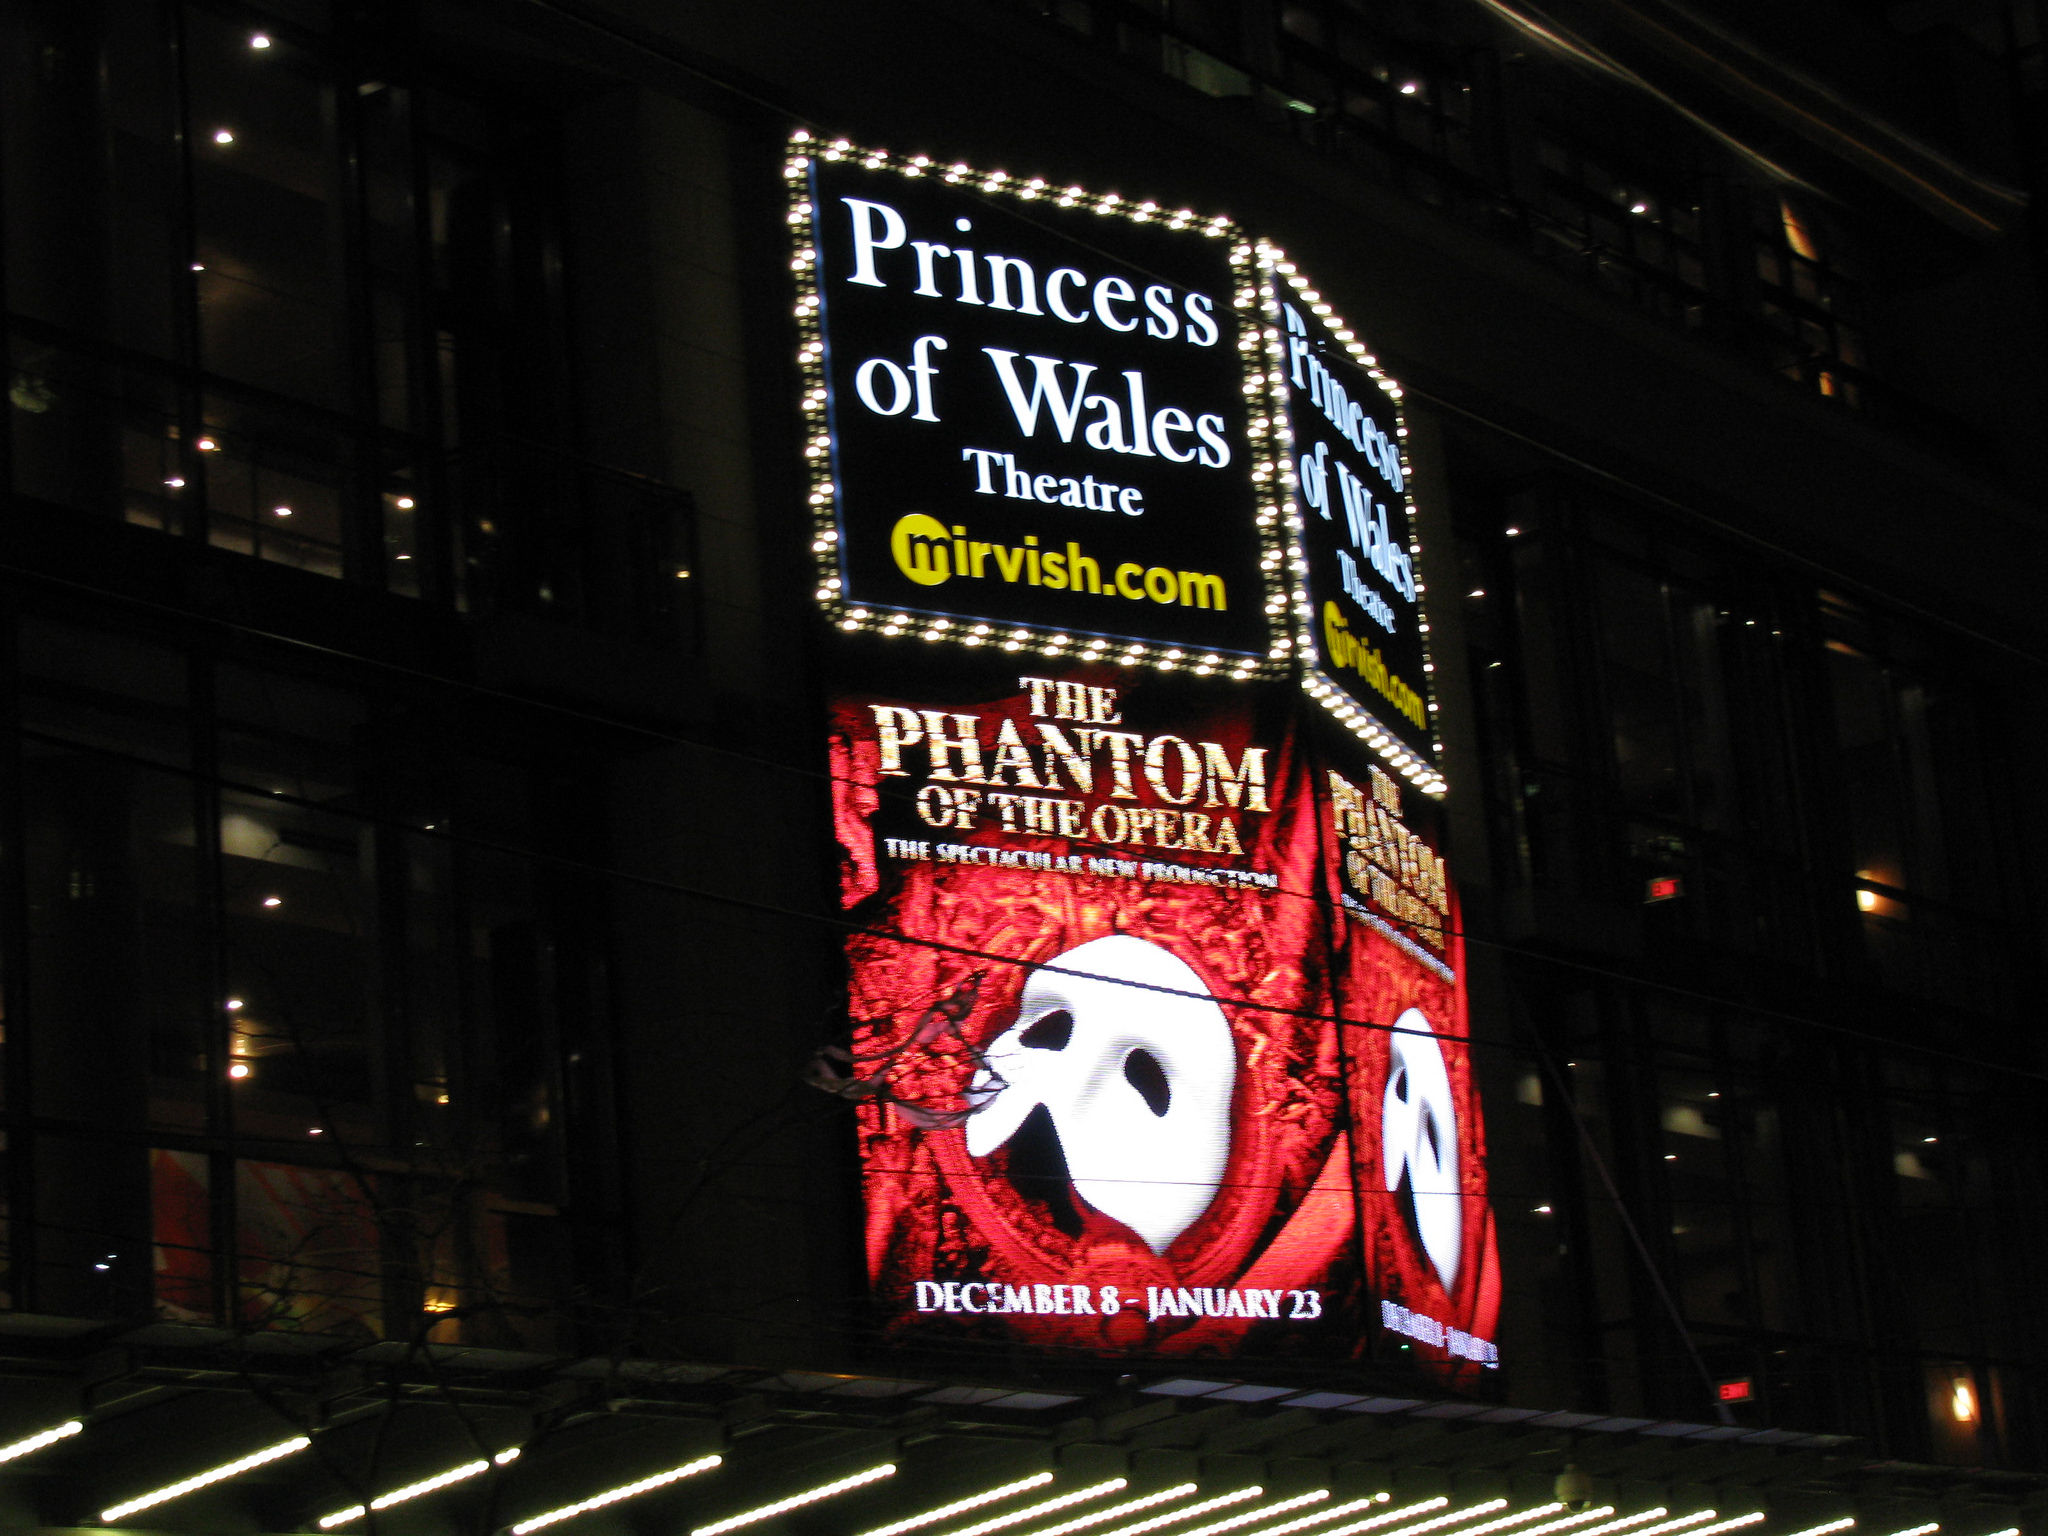 Princess of Wales Theatre showing Phantom of the Opera sign at night. And, first of all, also, another, furthermore, finally, in addition because, so, due to, while more. Consequently and therefore, in conclusion seems like, maybe, probably, almost most of all, most noteworthy, especially relevant.